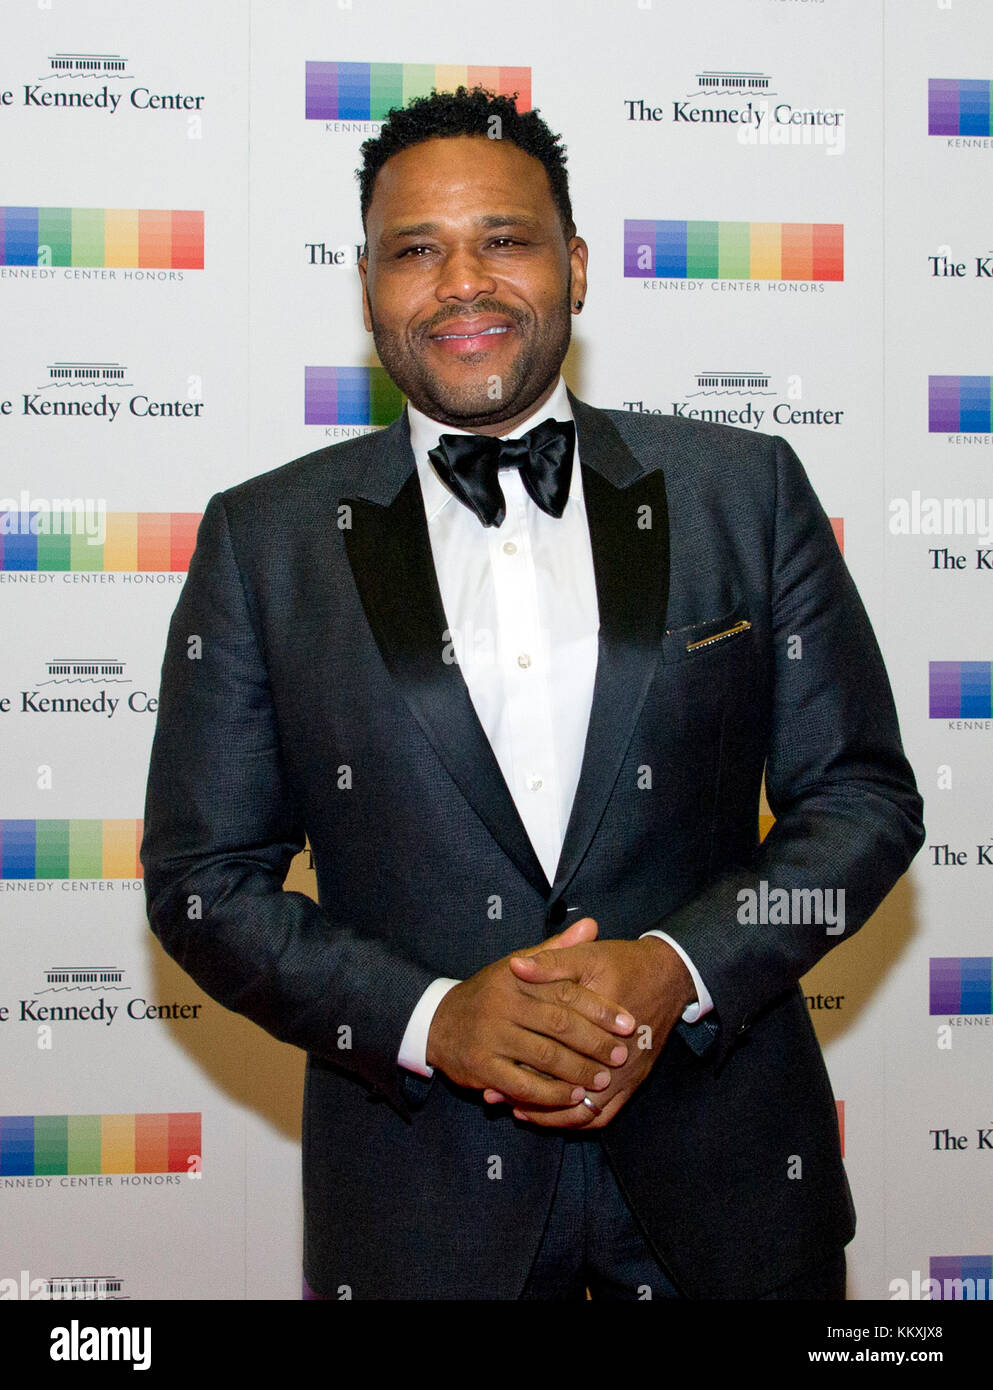 Actor Anthony Anderson arrives for the formal Artist's Dinner honoring the recipients of the 40th Annual Kennedy Center Honors hosted by United States Secretary of State Rex Tillerson at the US Department of State in Washington, DC on Saturday, December 2, 2017. The 2017 honorees are: American dancer and choreographer Carmen de Lavallade; Cuban American singer-songwriter and actress Gloria Estefan; American hip hop artist and entertainment icon LL COOL J; American television writer and producer Norman Lear; and American musician and record producer Lionel Richie. Credit: Ron Sachs/Pool via Stock Photo